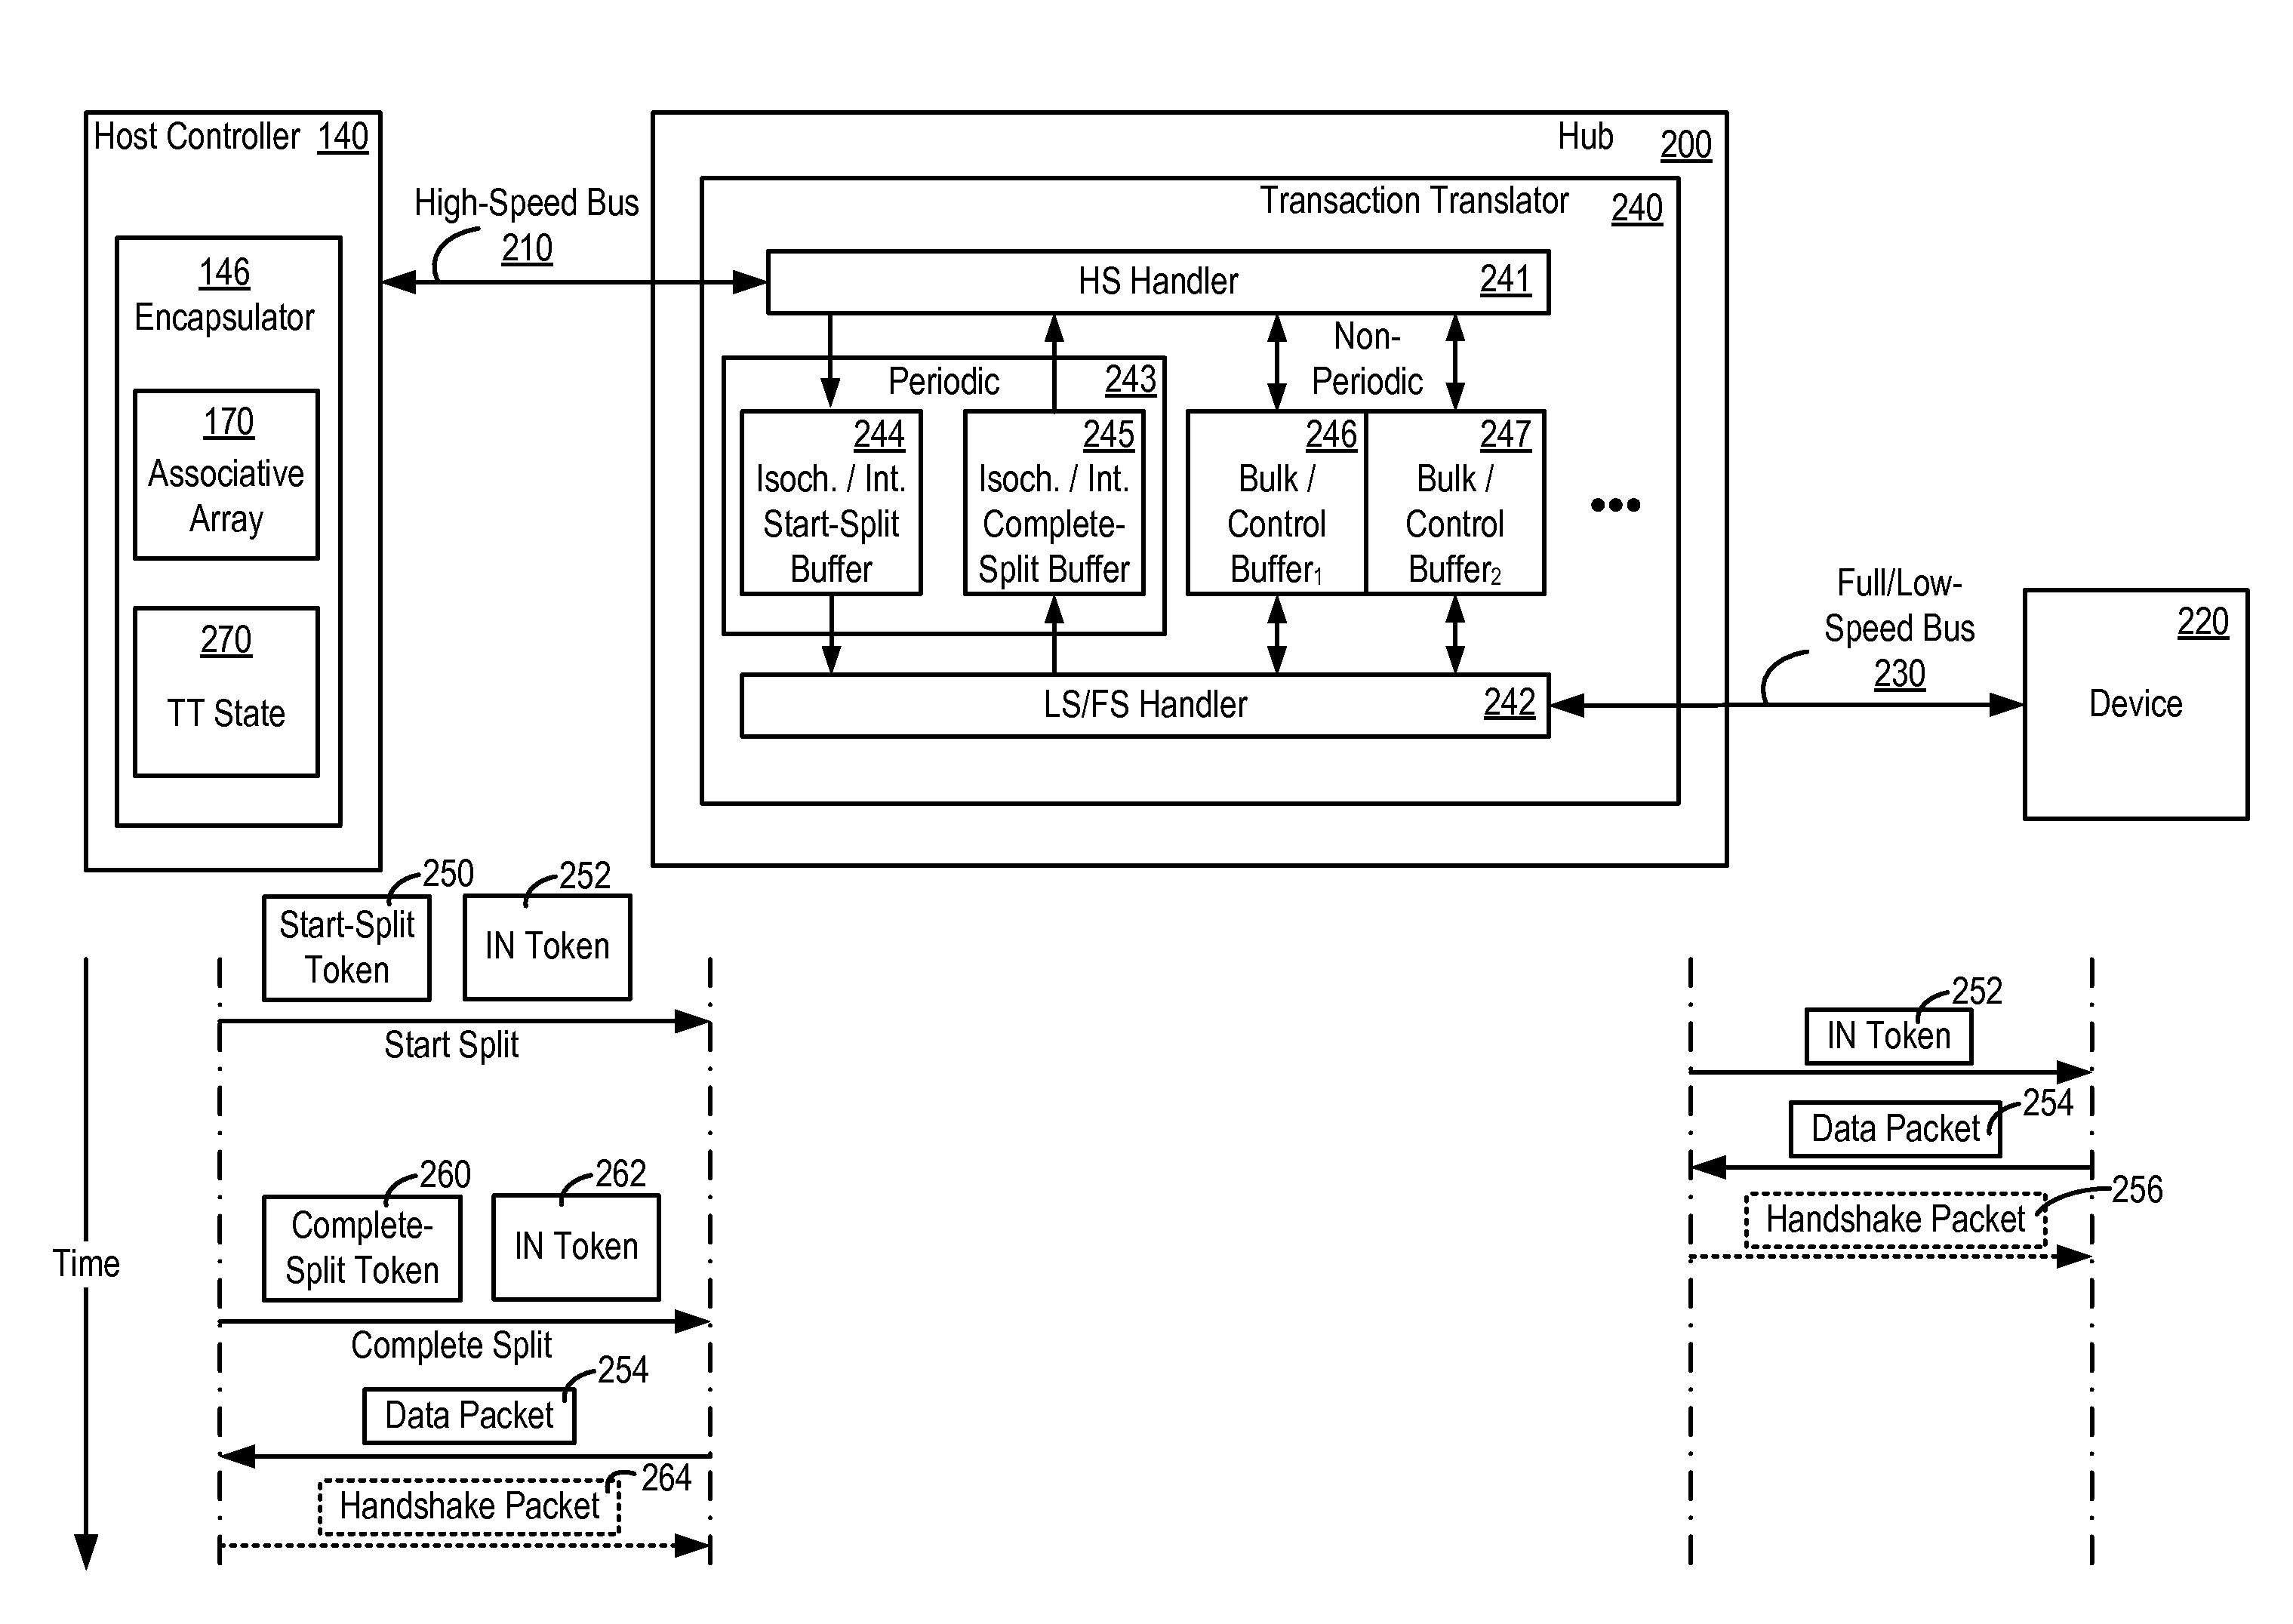 Method and apparatus for tracking transactions in a multi-speed bus environment